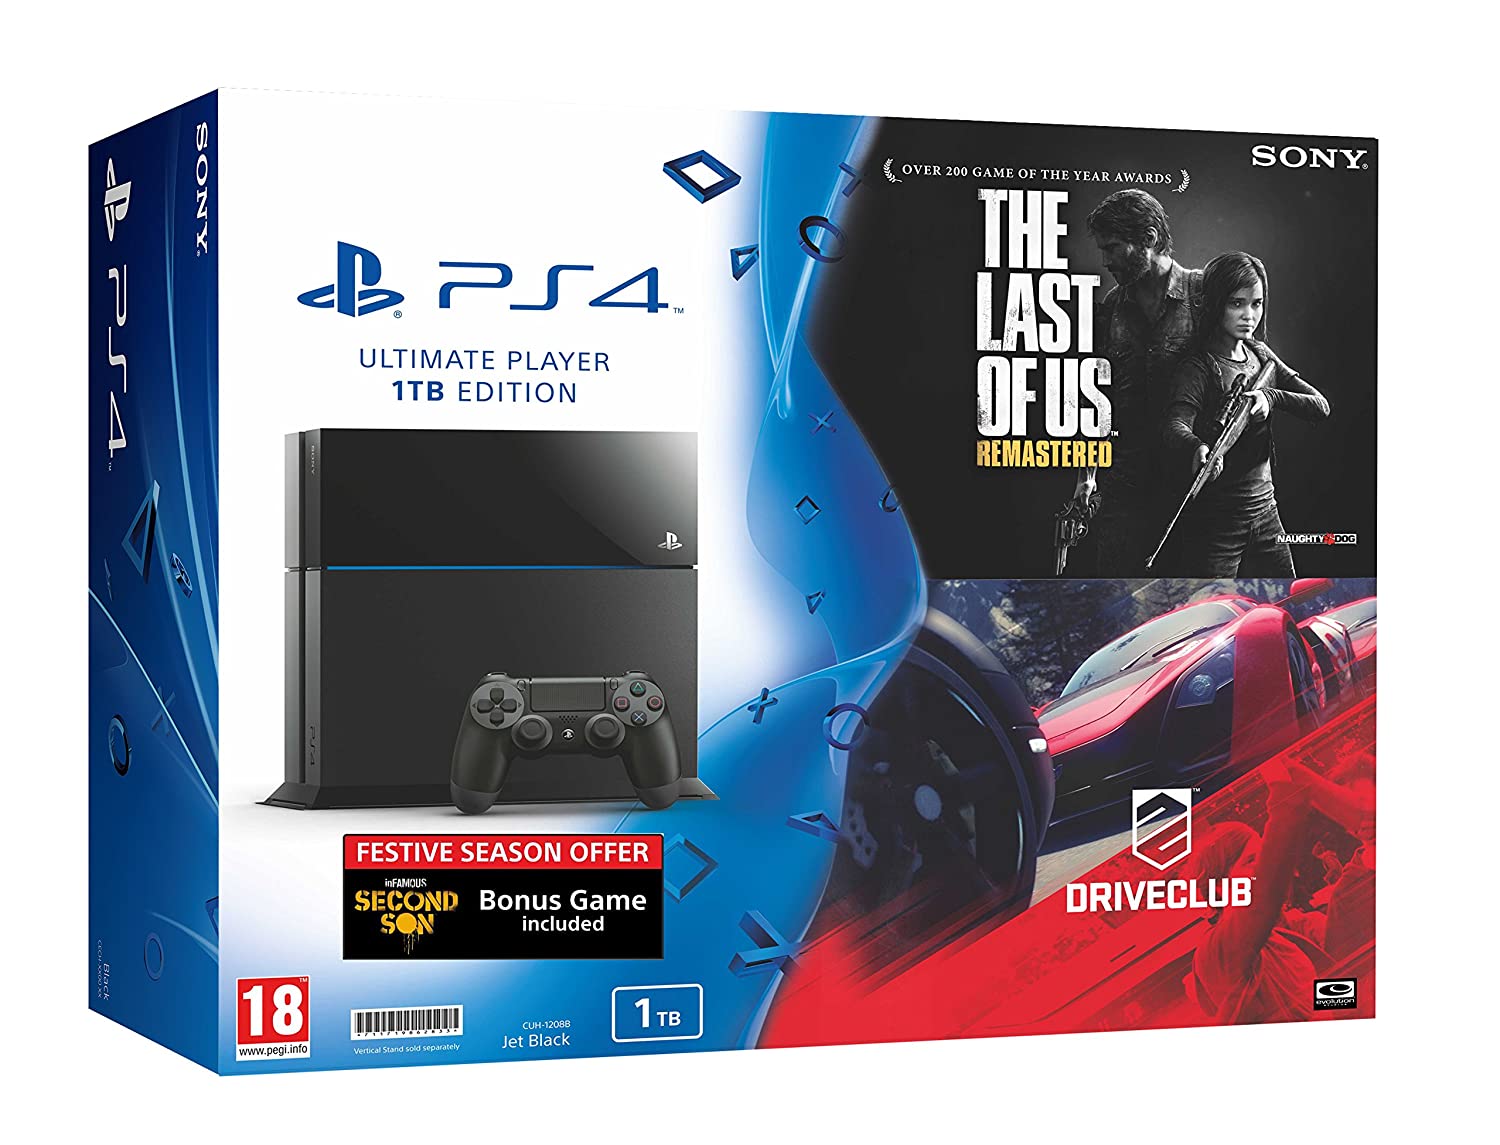 Ps4 Ultimate Edition 1tb. DRIVECLUB Sony ps4 диск. Ps4 Pro 1tb версия программы. Диск gt 7 ps4 Unboxing.